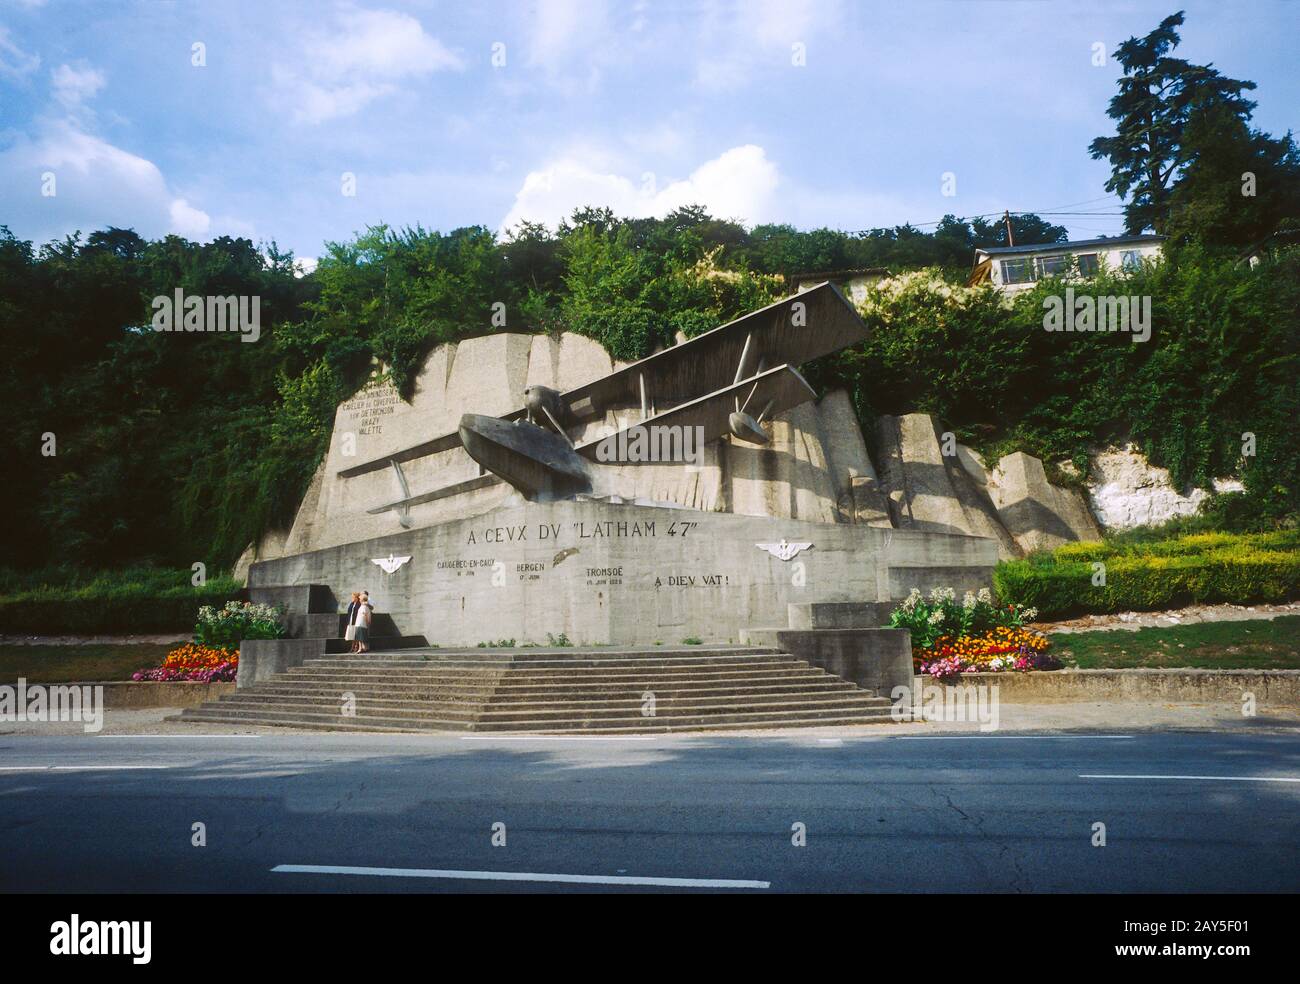 Memorial of the 'Latham 47' in Caudebec-en-caux on the Seine in France. Stock Photo